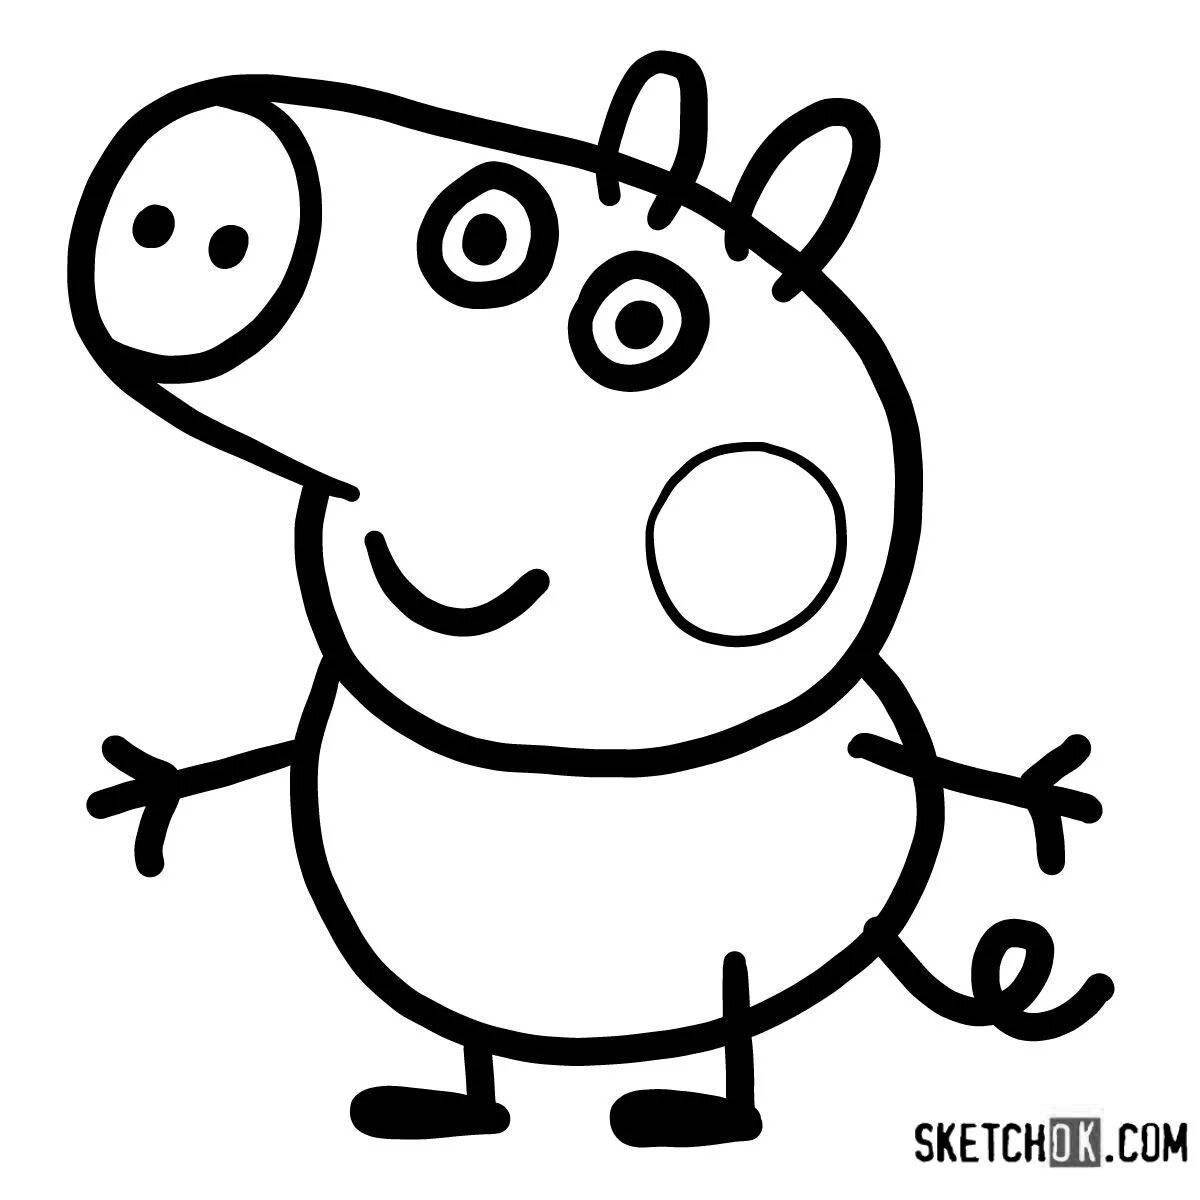 Colourful peppa pig frog coloring page